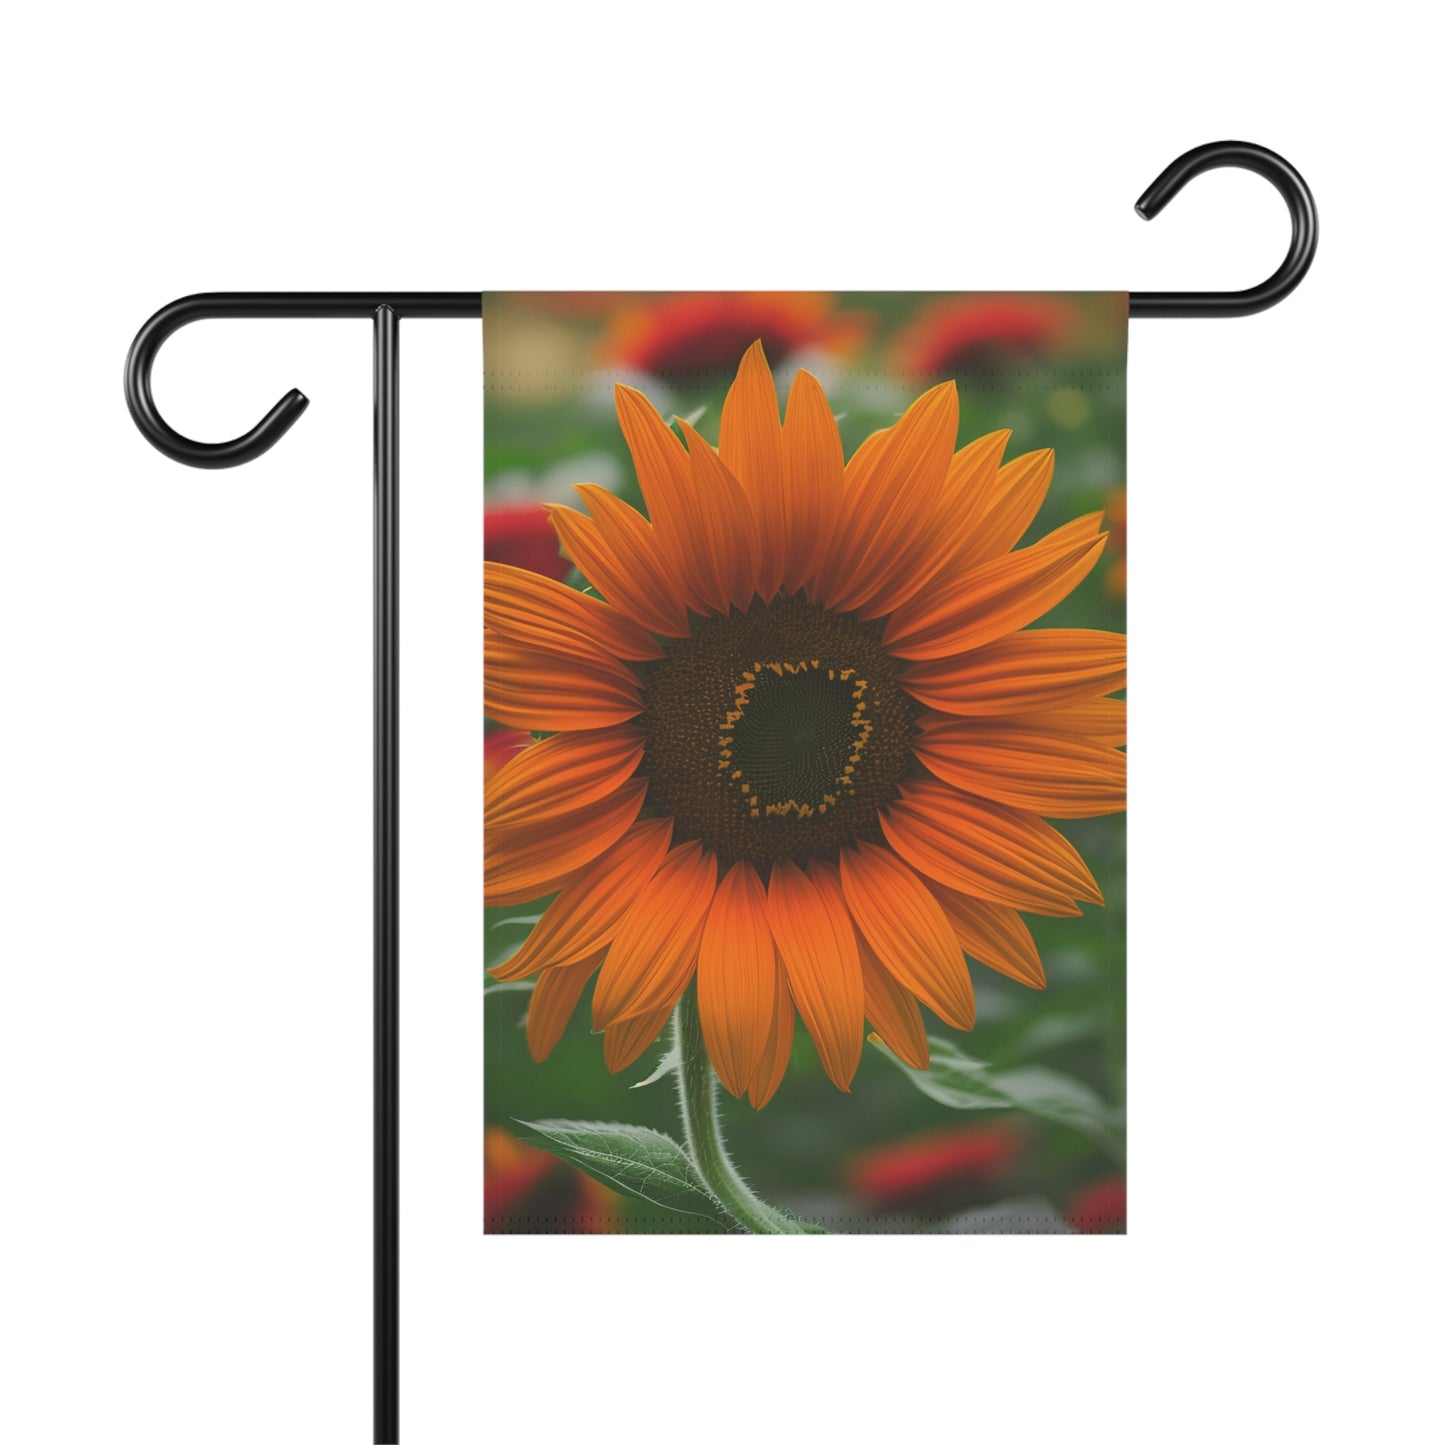 Orange Sunflower Flag Garden & House Banner (SP Photography Collection) (Pole not included)